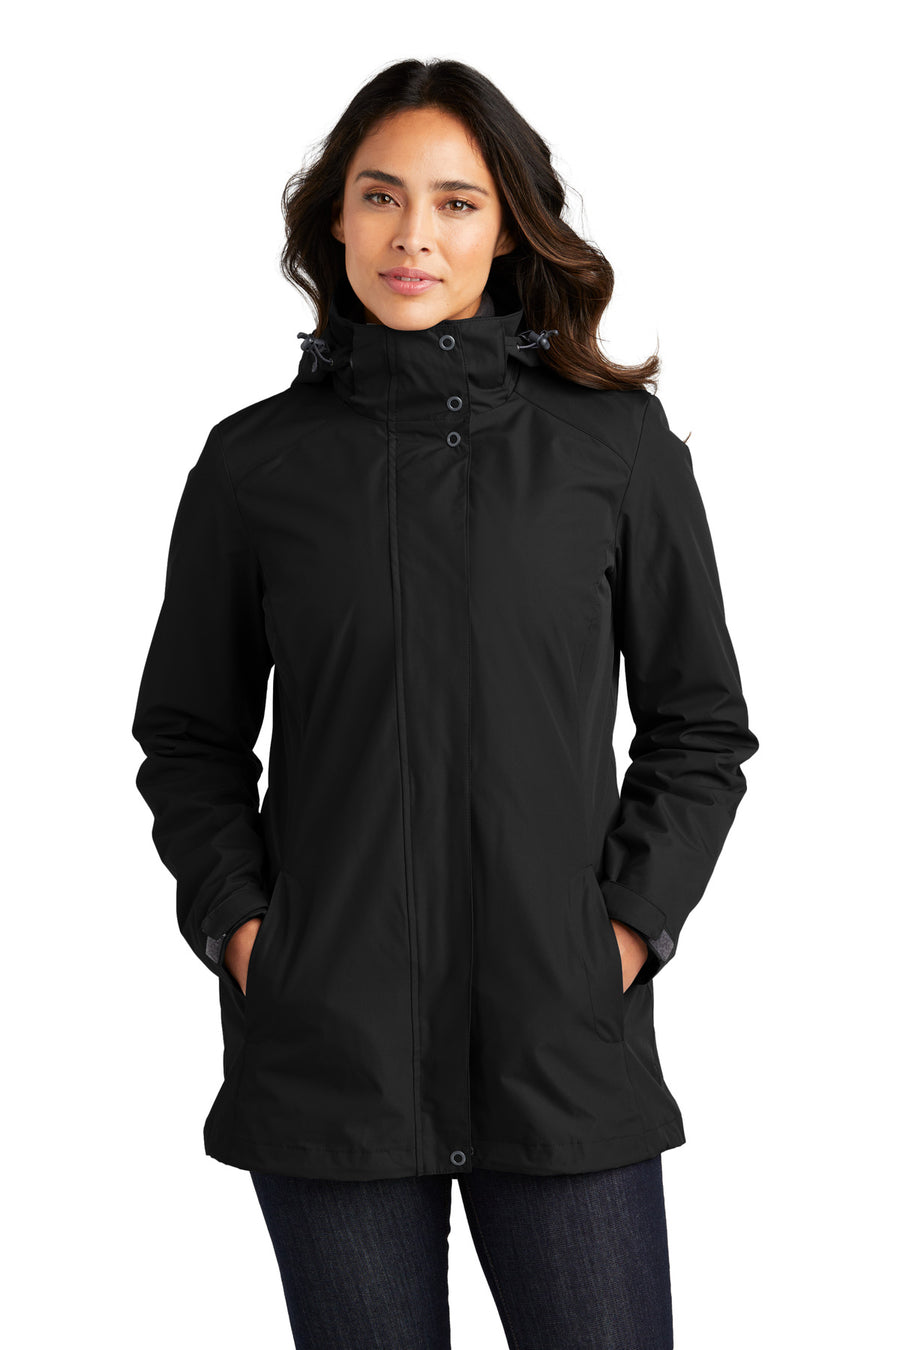 Port Authority All-Weather 3-in-1 Jacket